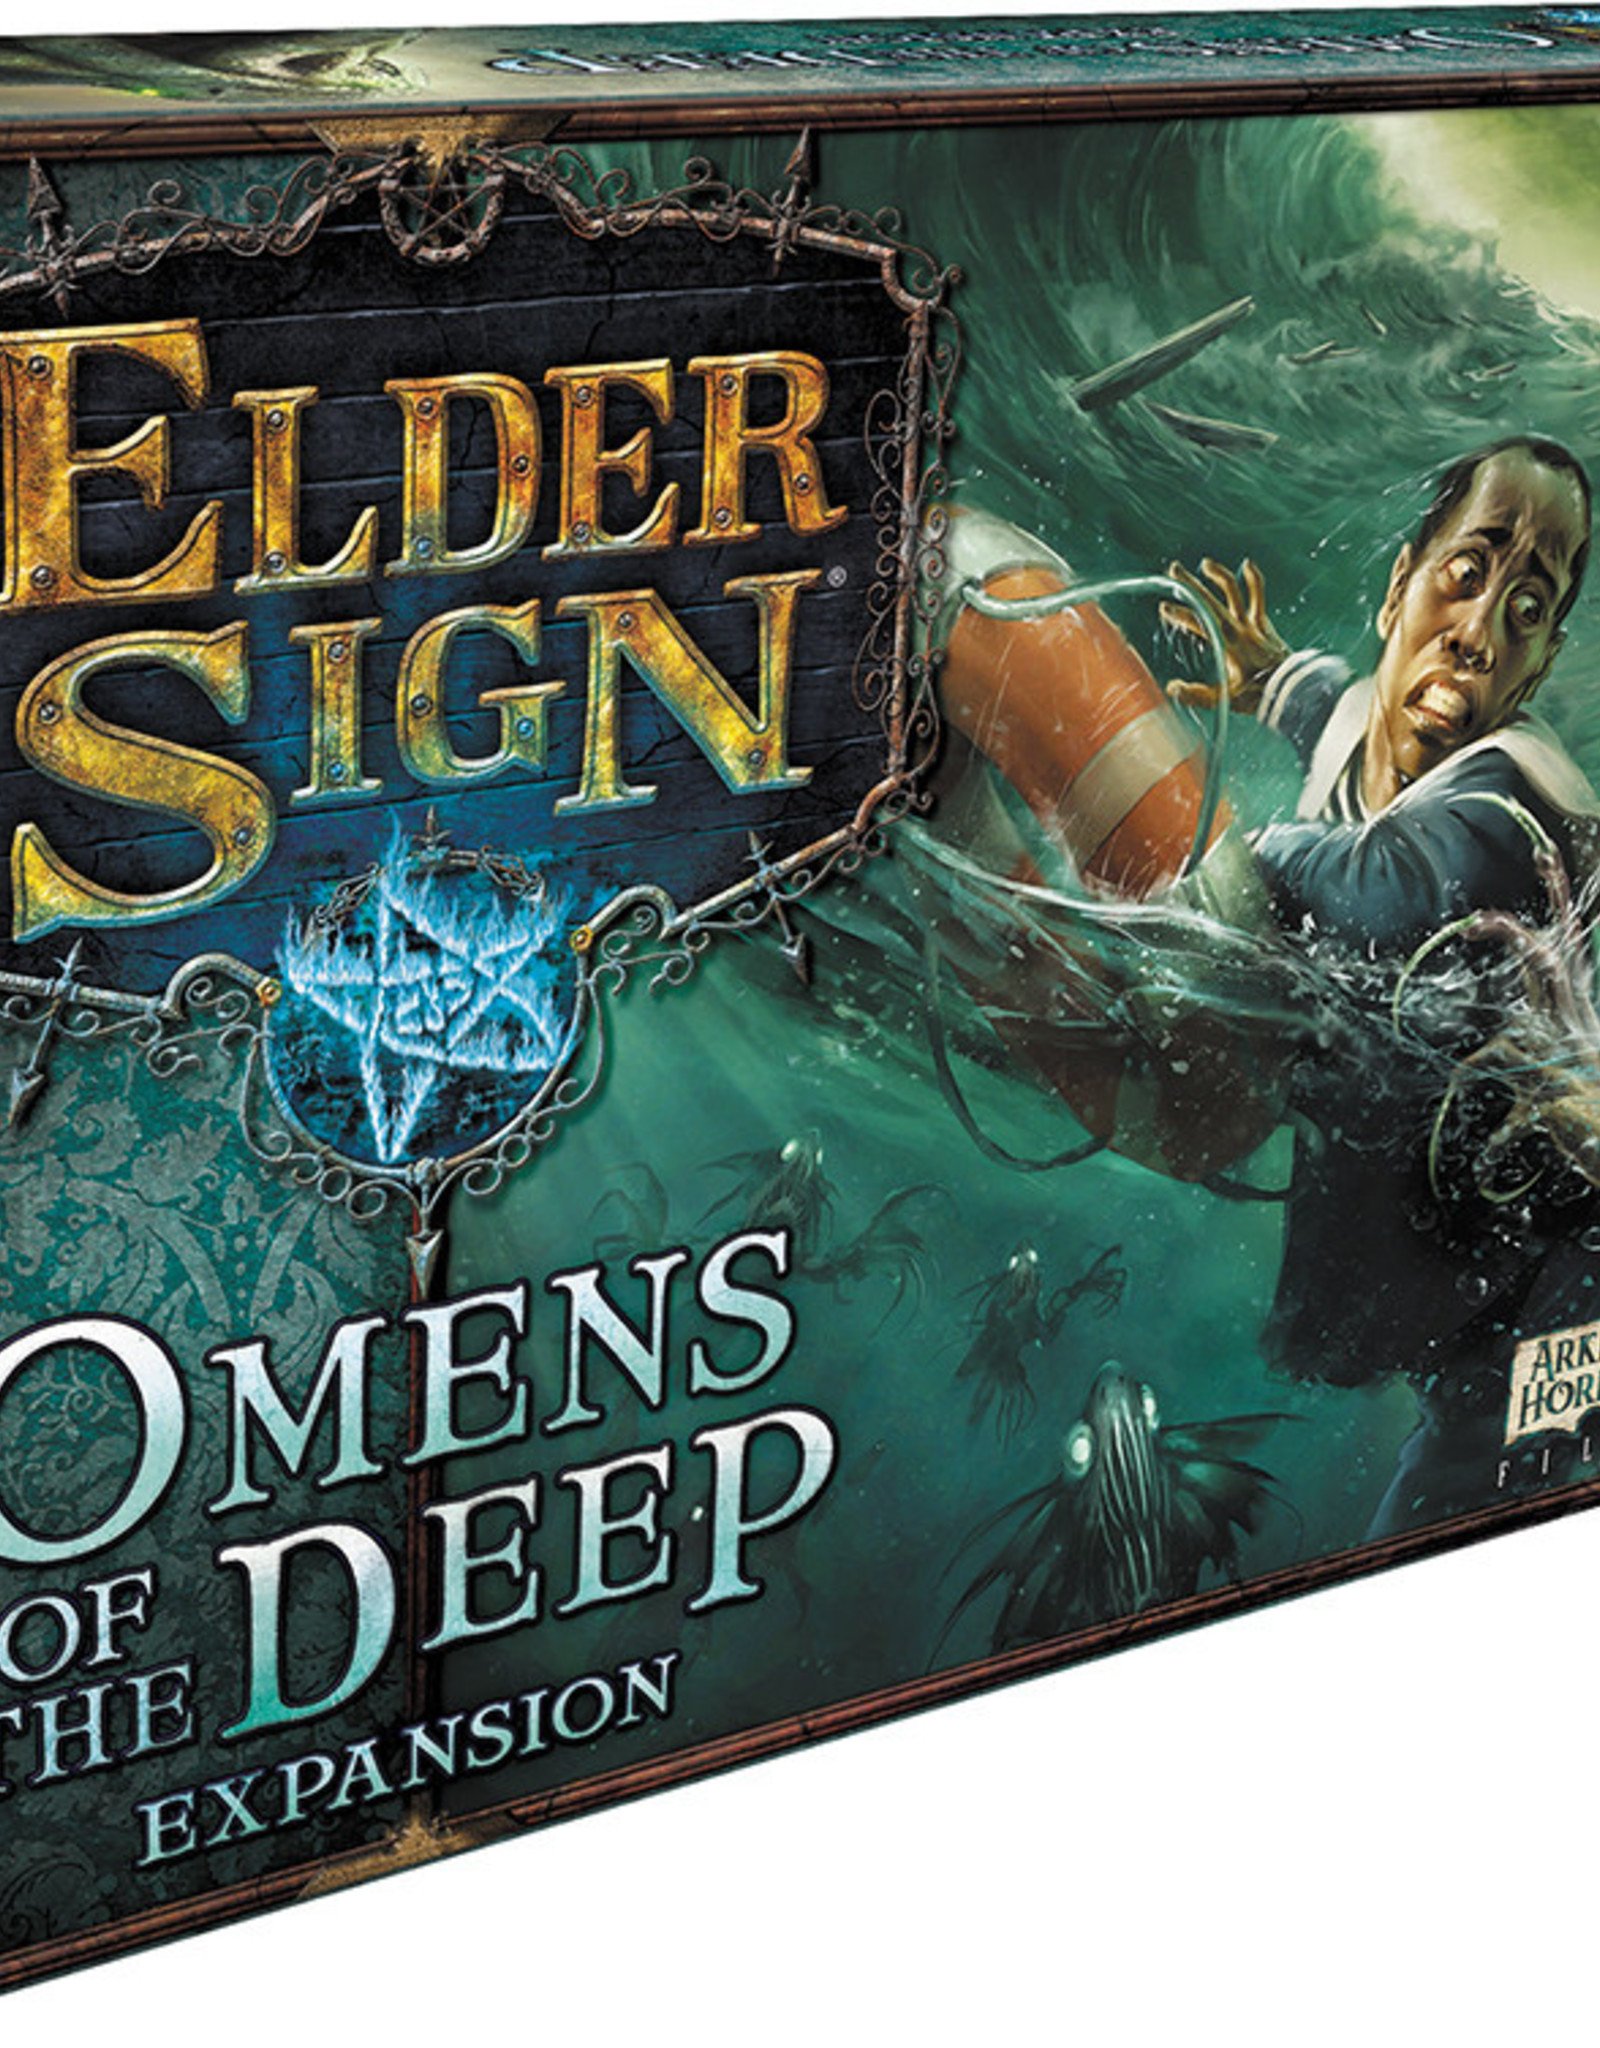 elder sign omens of the deep game videos